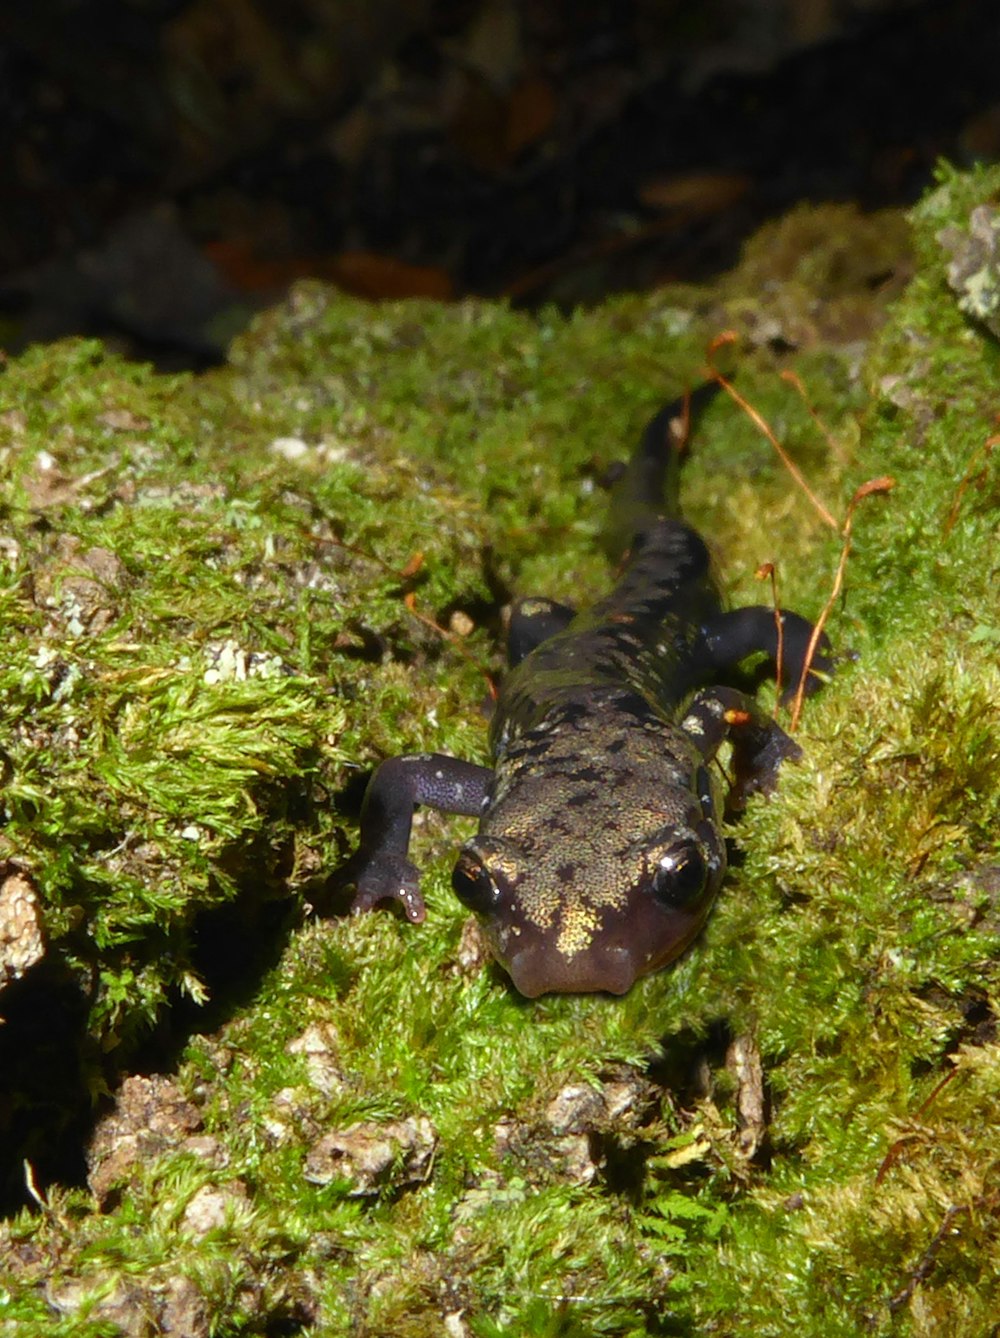 a small black lizard sitting on top of a lush green field